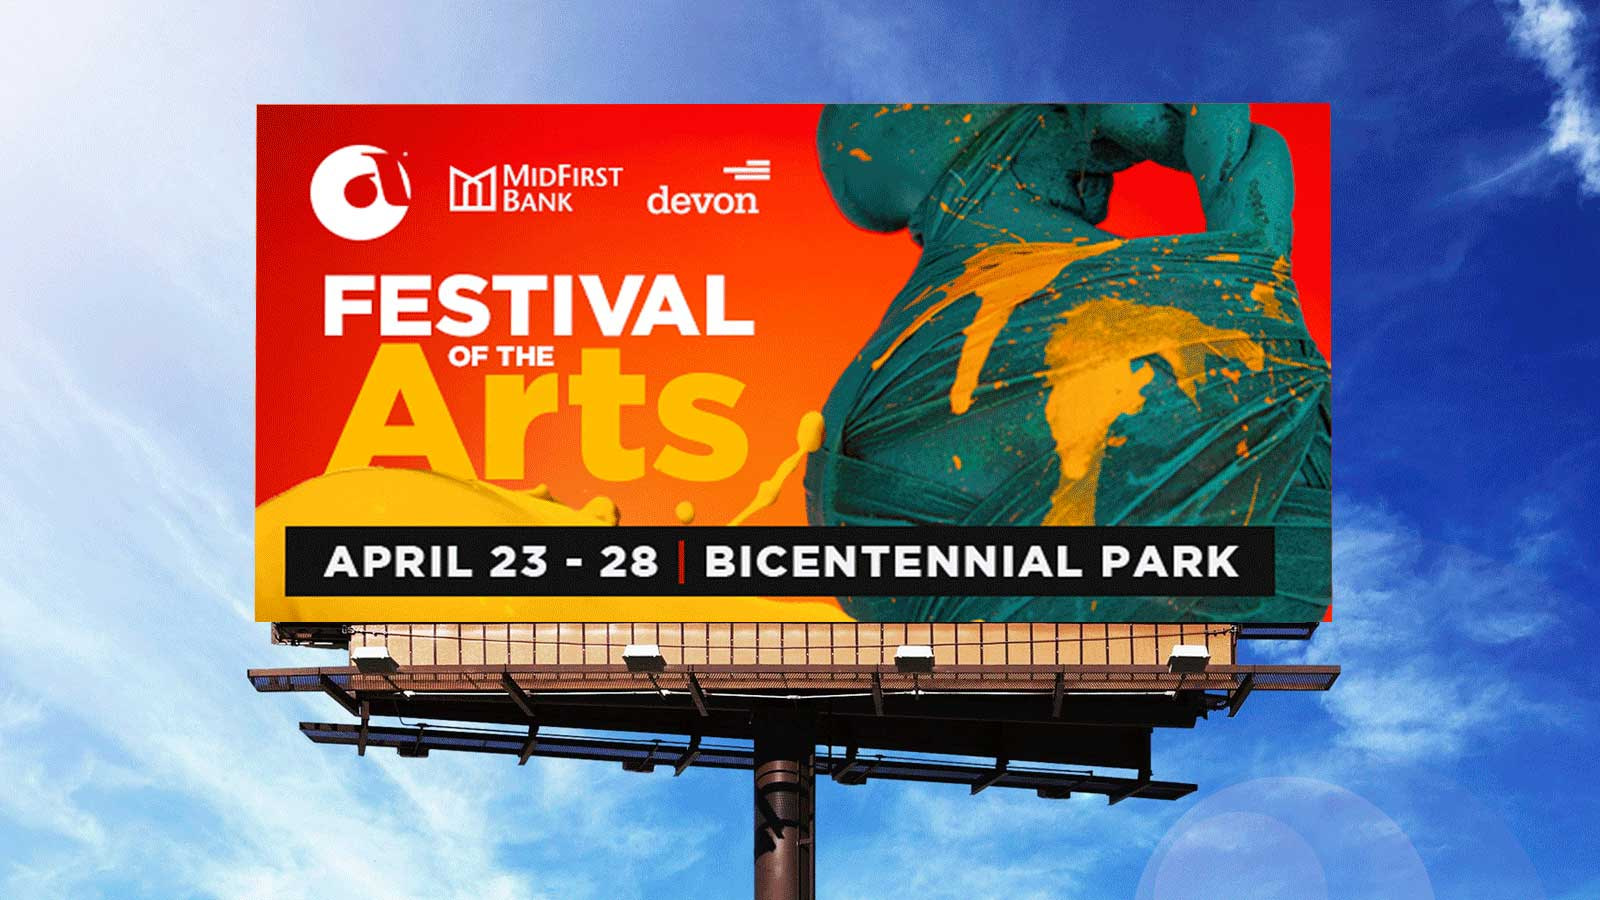 Insight Creative Group's billboard design for Festival of the Arts 2019